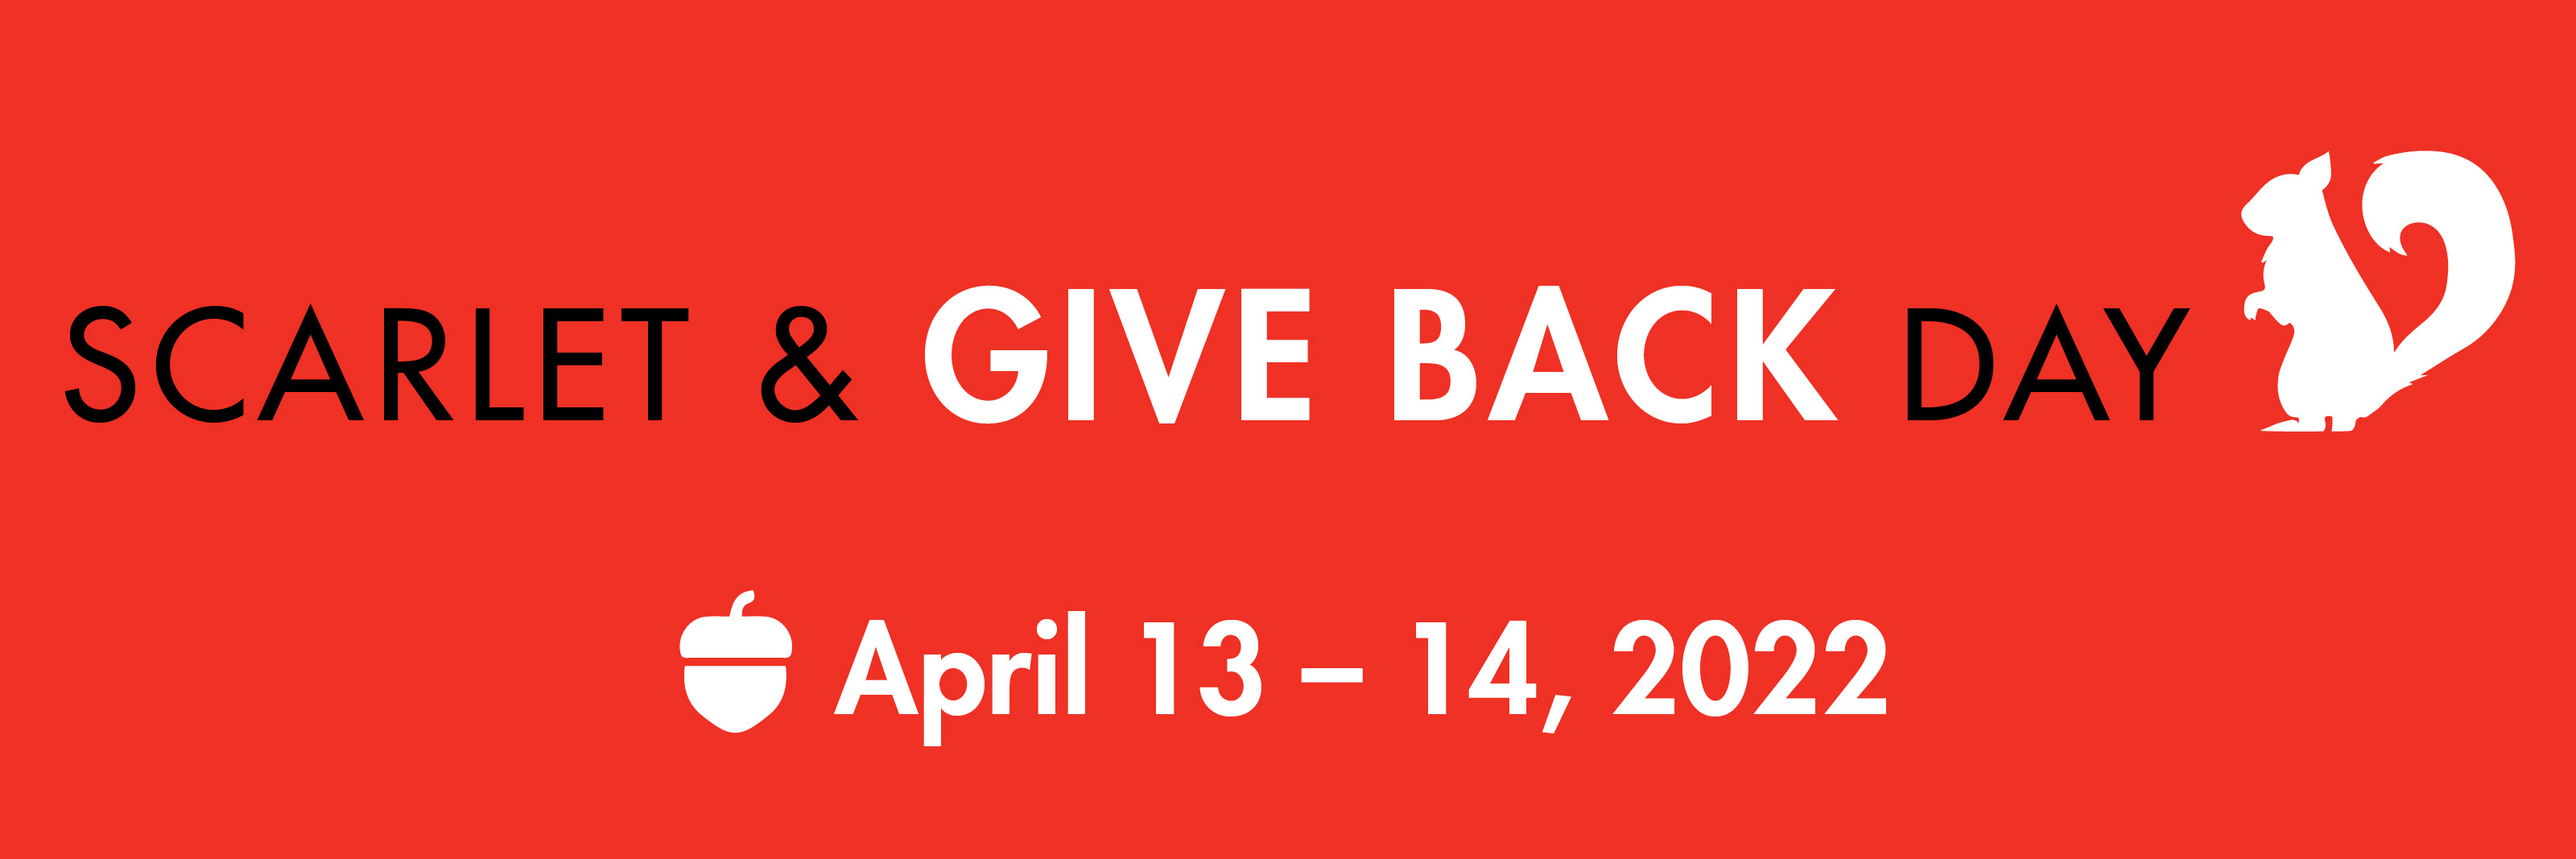 Black and White Text over Red Background. Text: Scarlet & Give Back Day April 13-14. 